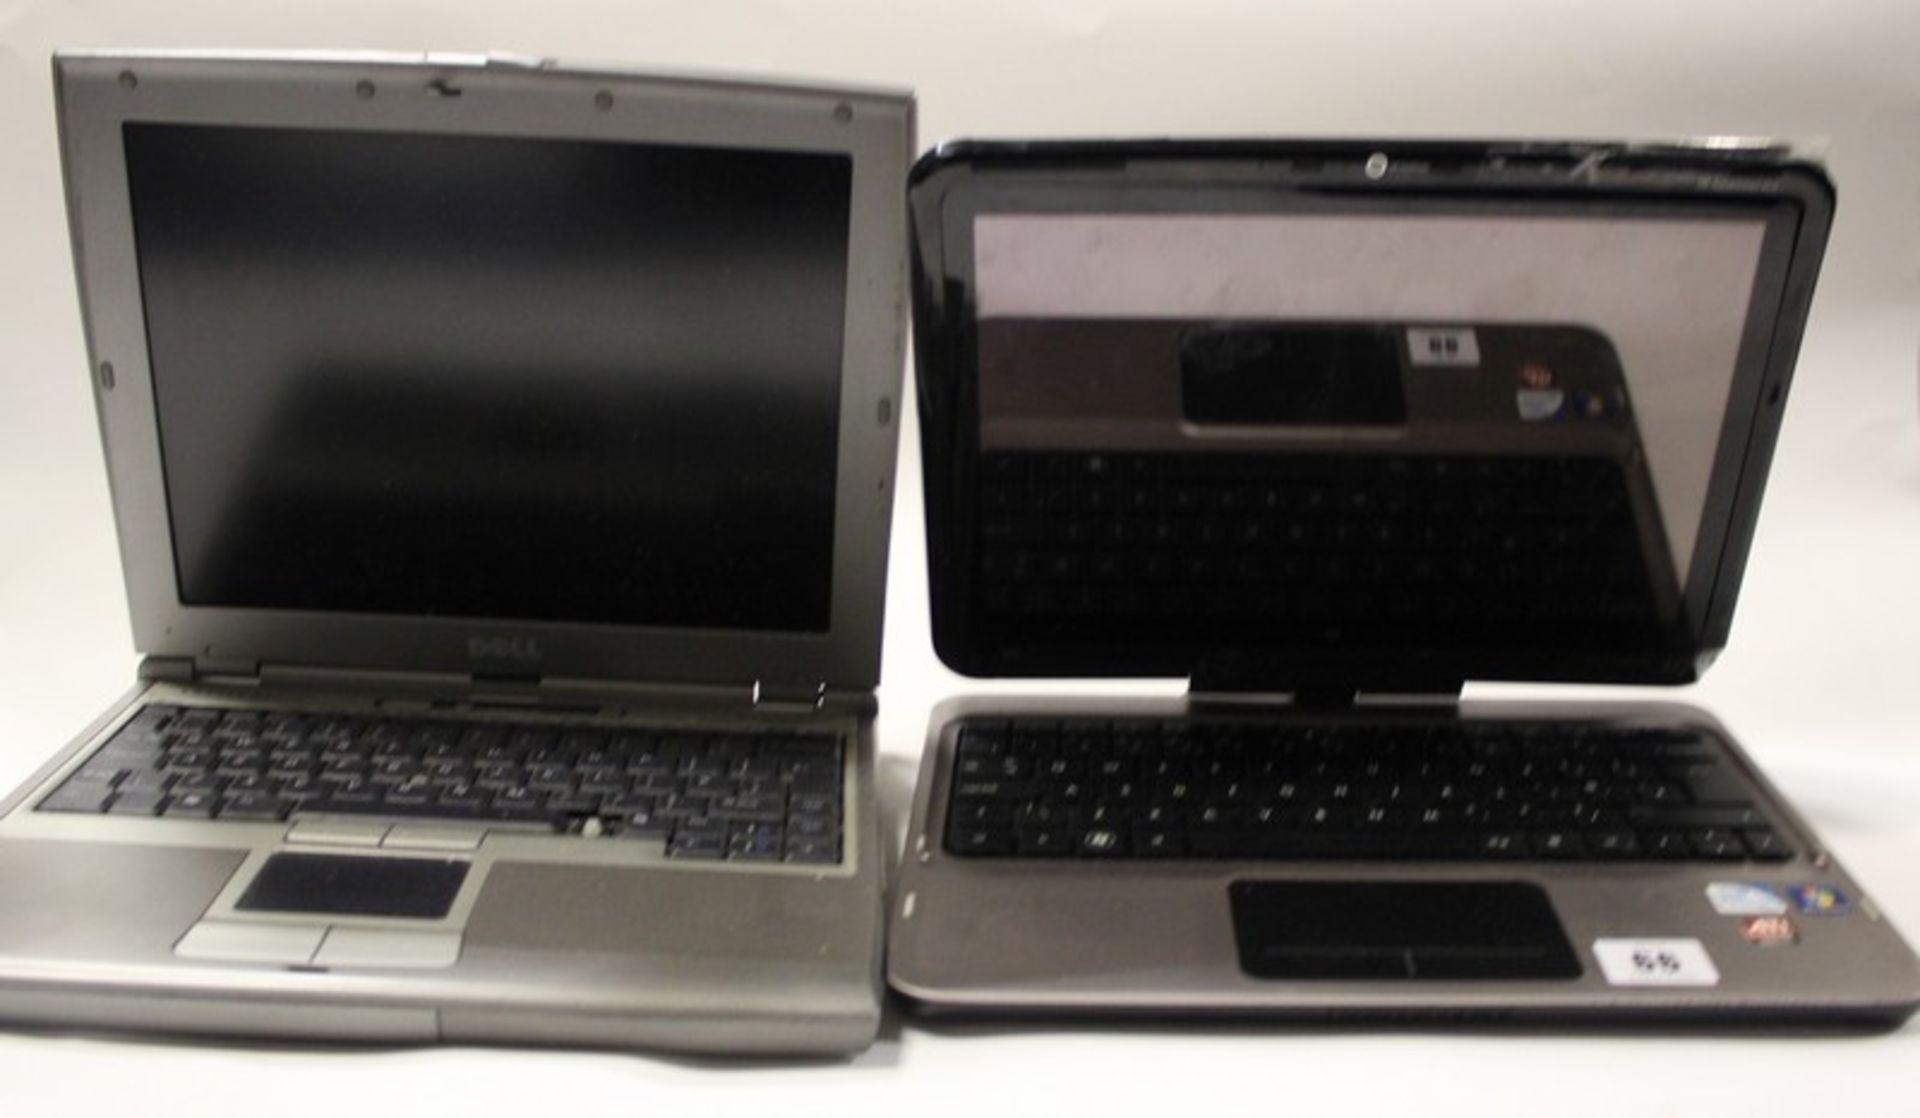 A Dell Latitude D400 model: PPT (Hard drive removed) and a HP TouchSmart tm2 laptop (Hard drive